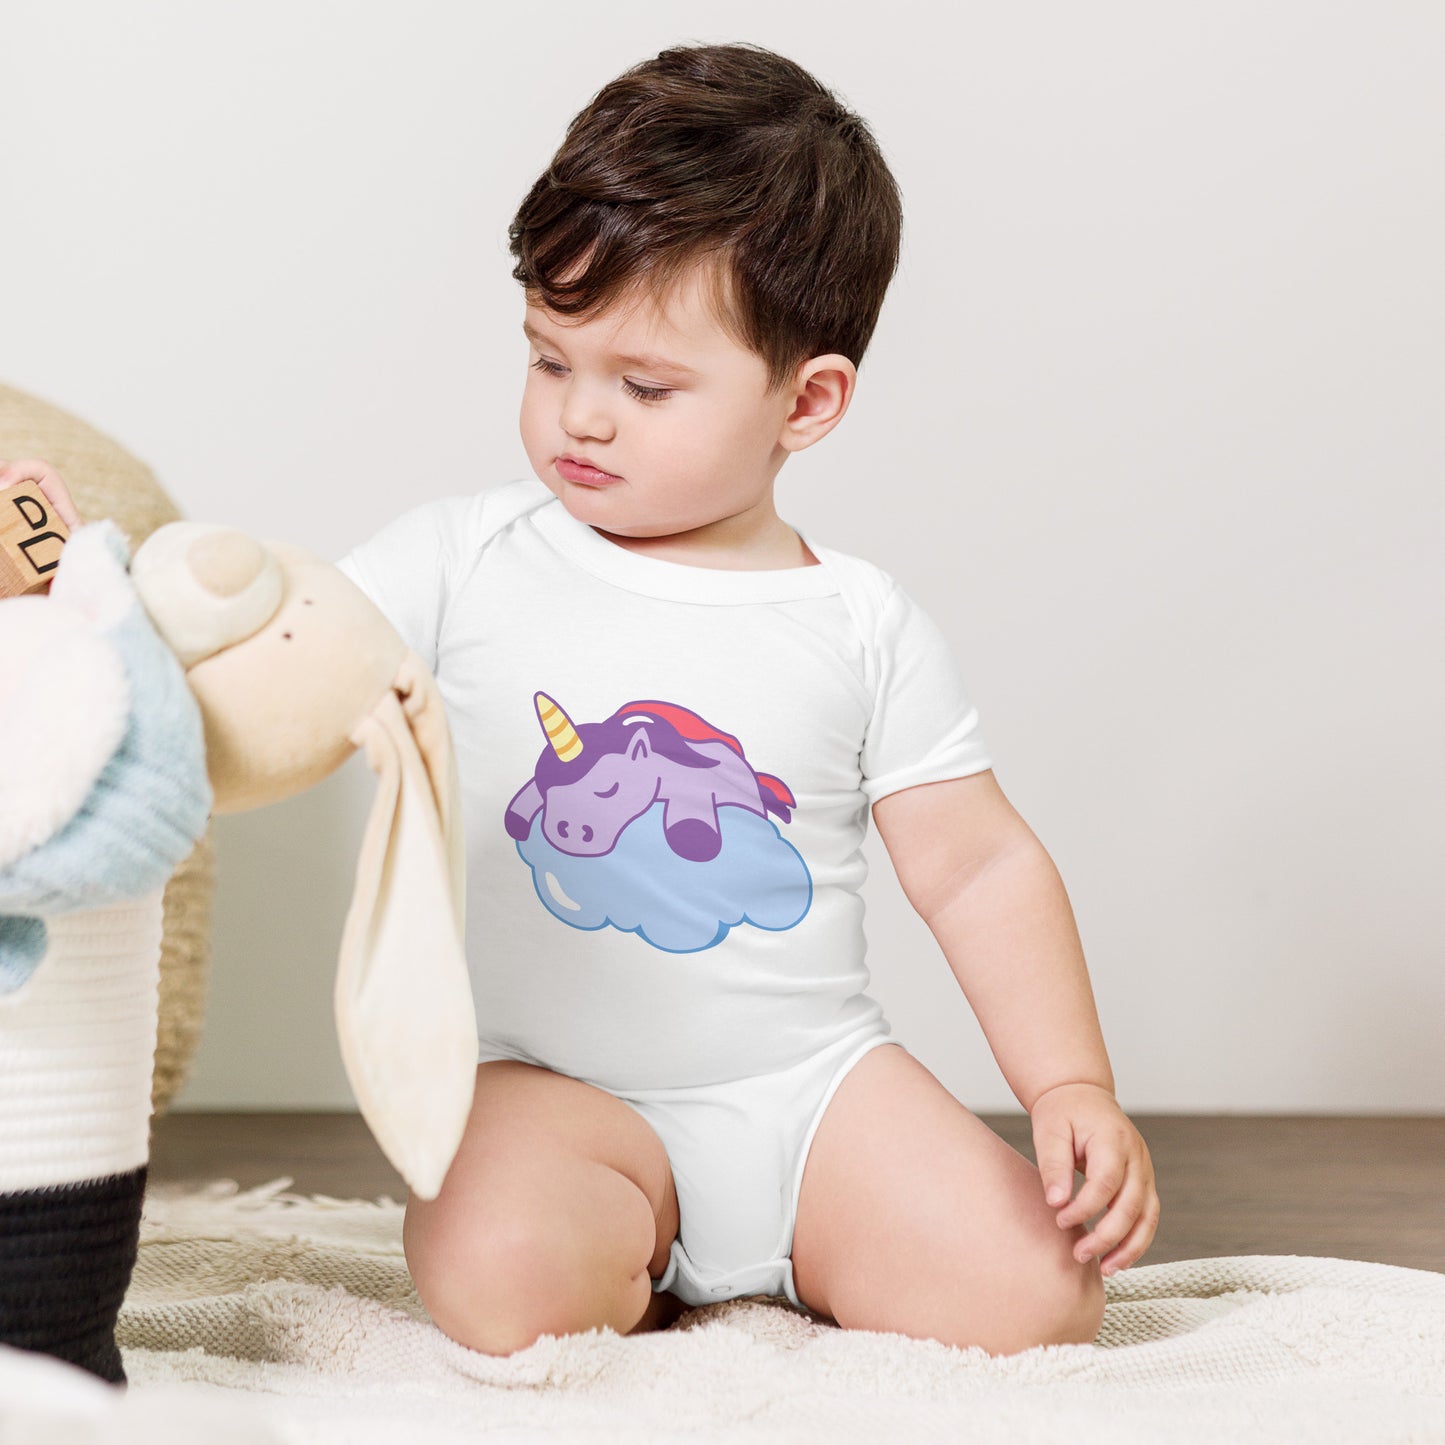 baby with a white bodysuit with a print of a sleeping unicorn on a cloud